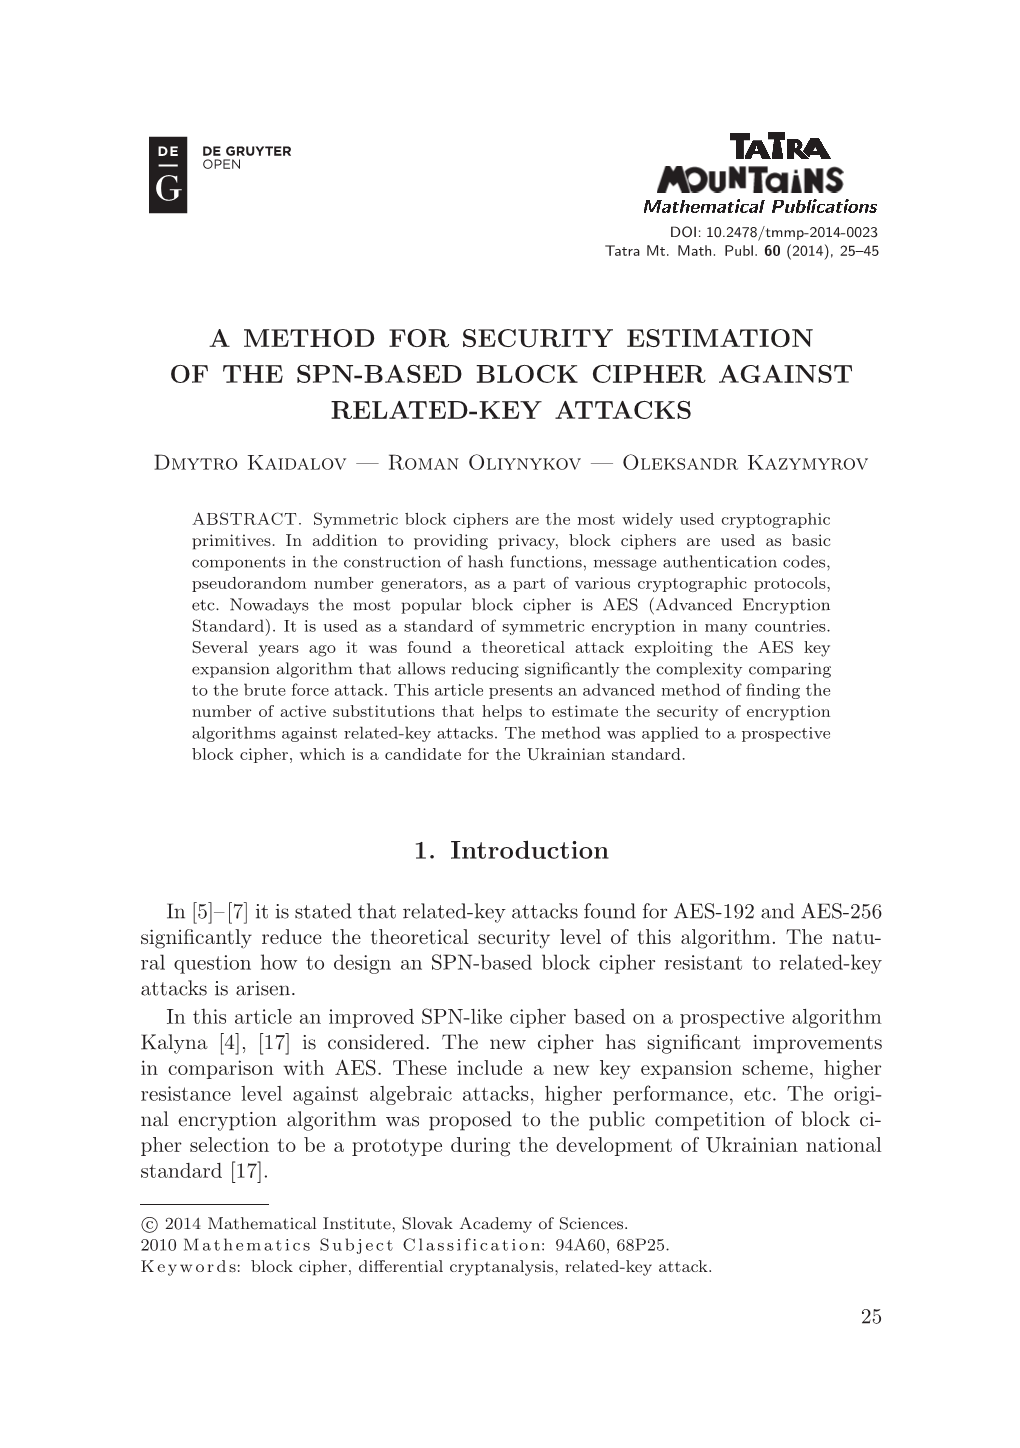 A Method for Security Estimation of the Spn-Based Block Cipher Against Related-Key Attacks